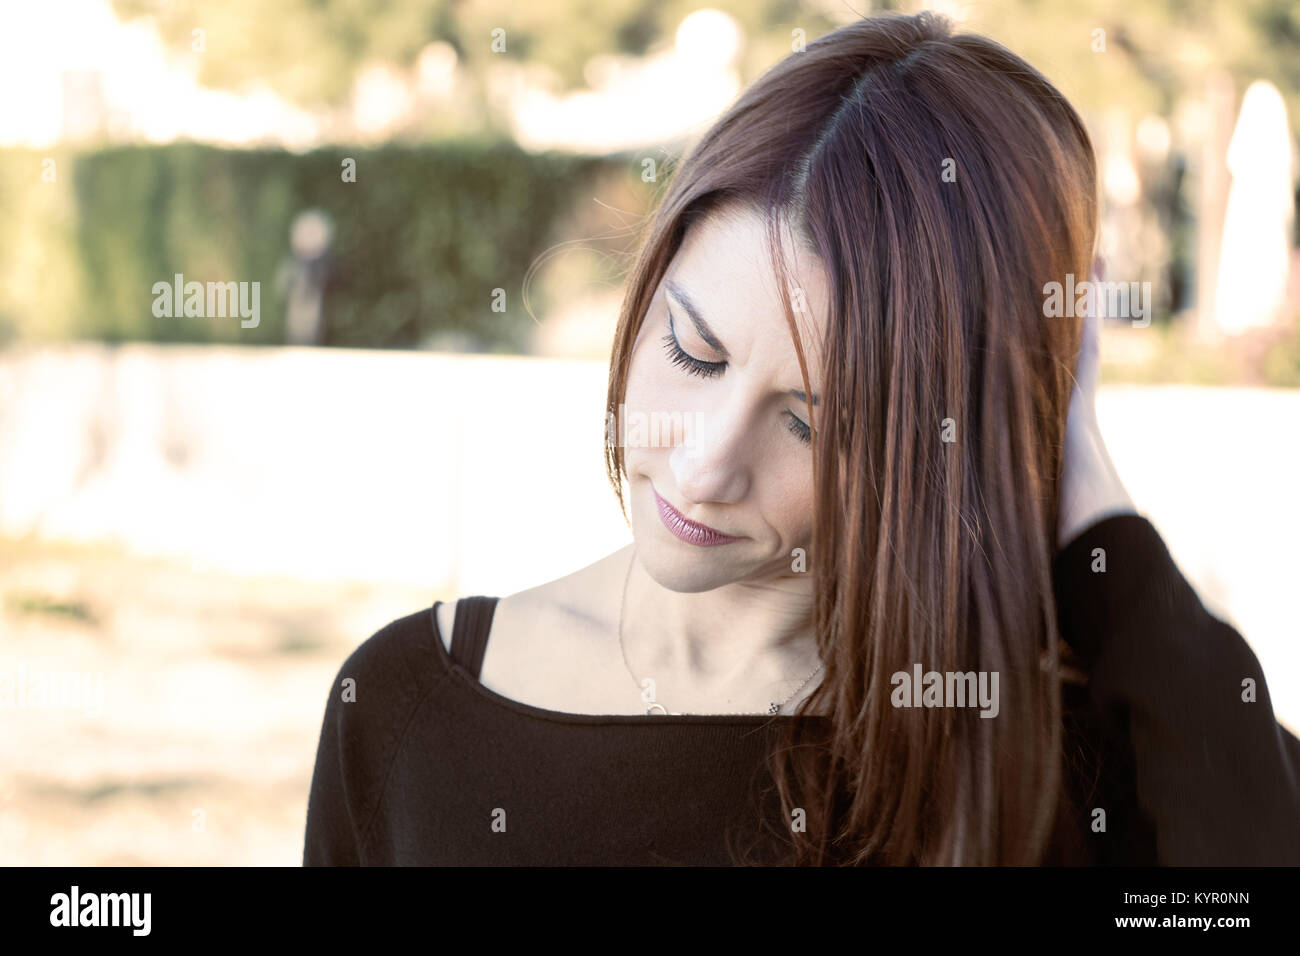 Portrait of a woman outdoors with her hand behind her head and looking down, worry, thinking. Stock Photo